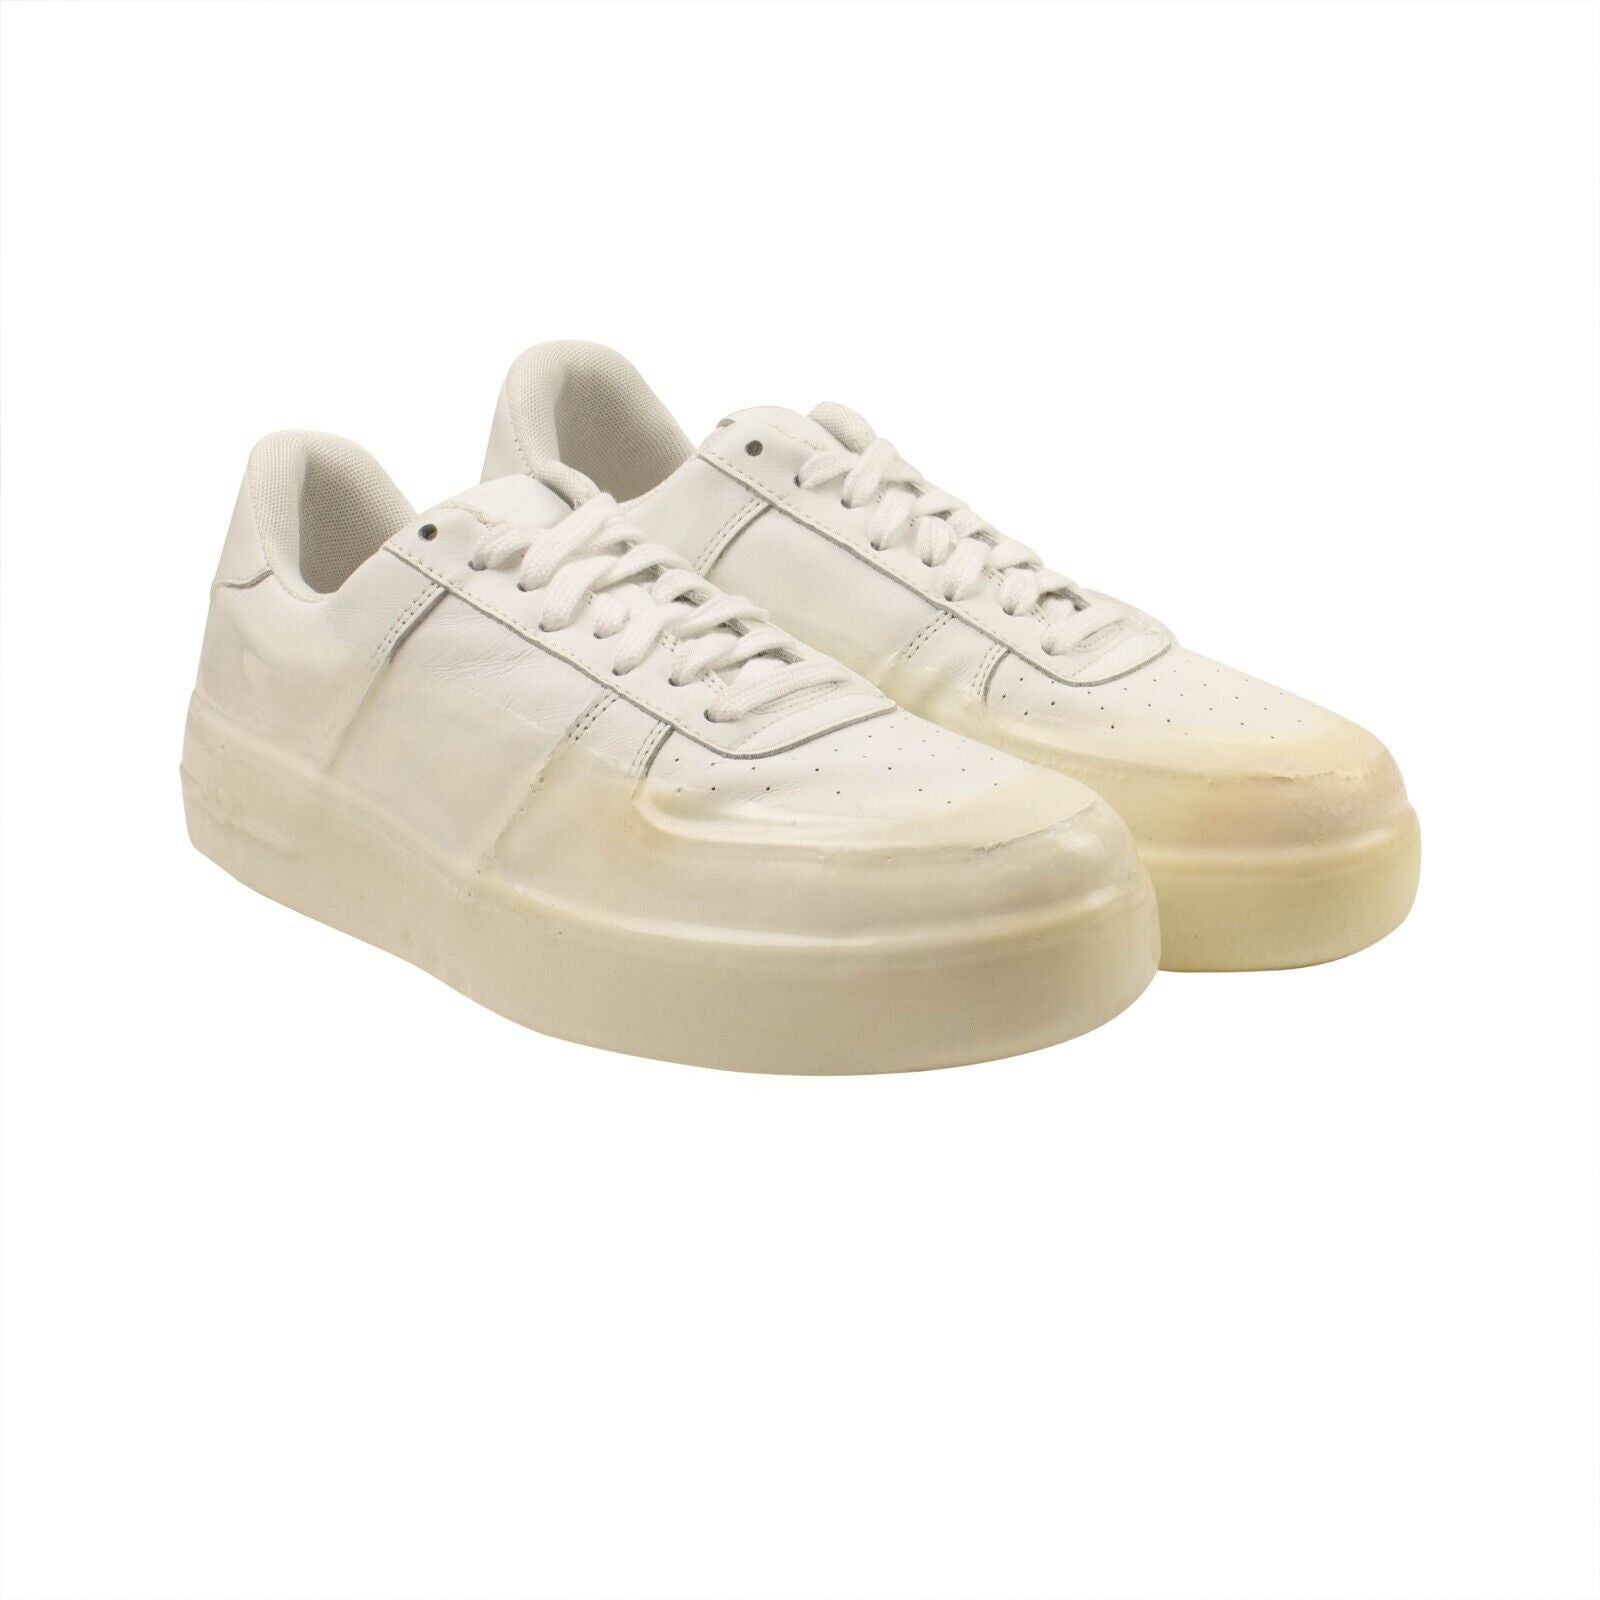 424 On Fairfax Dipped Sneakers - White